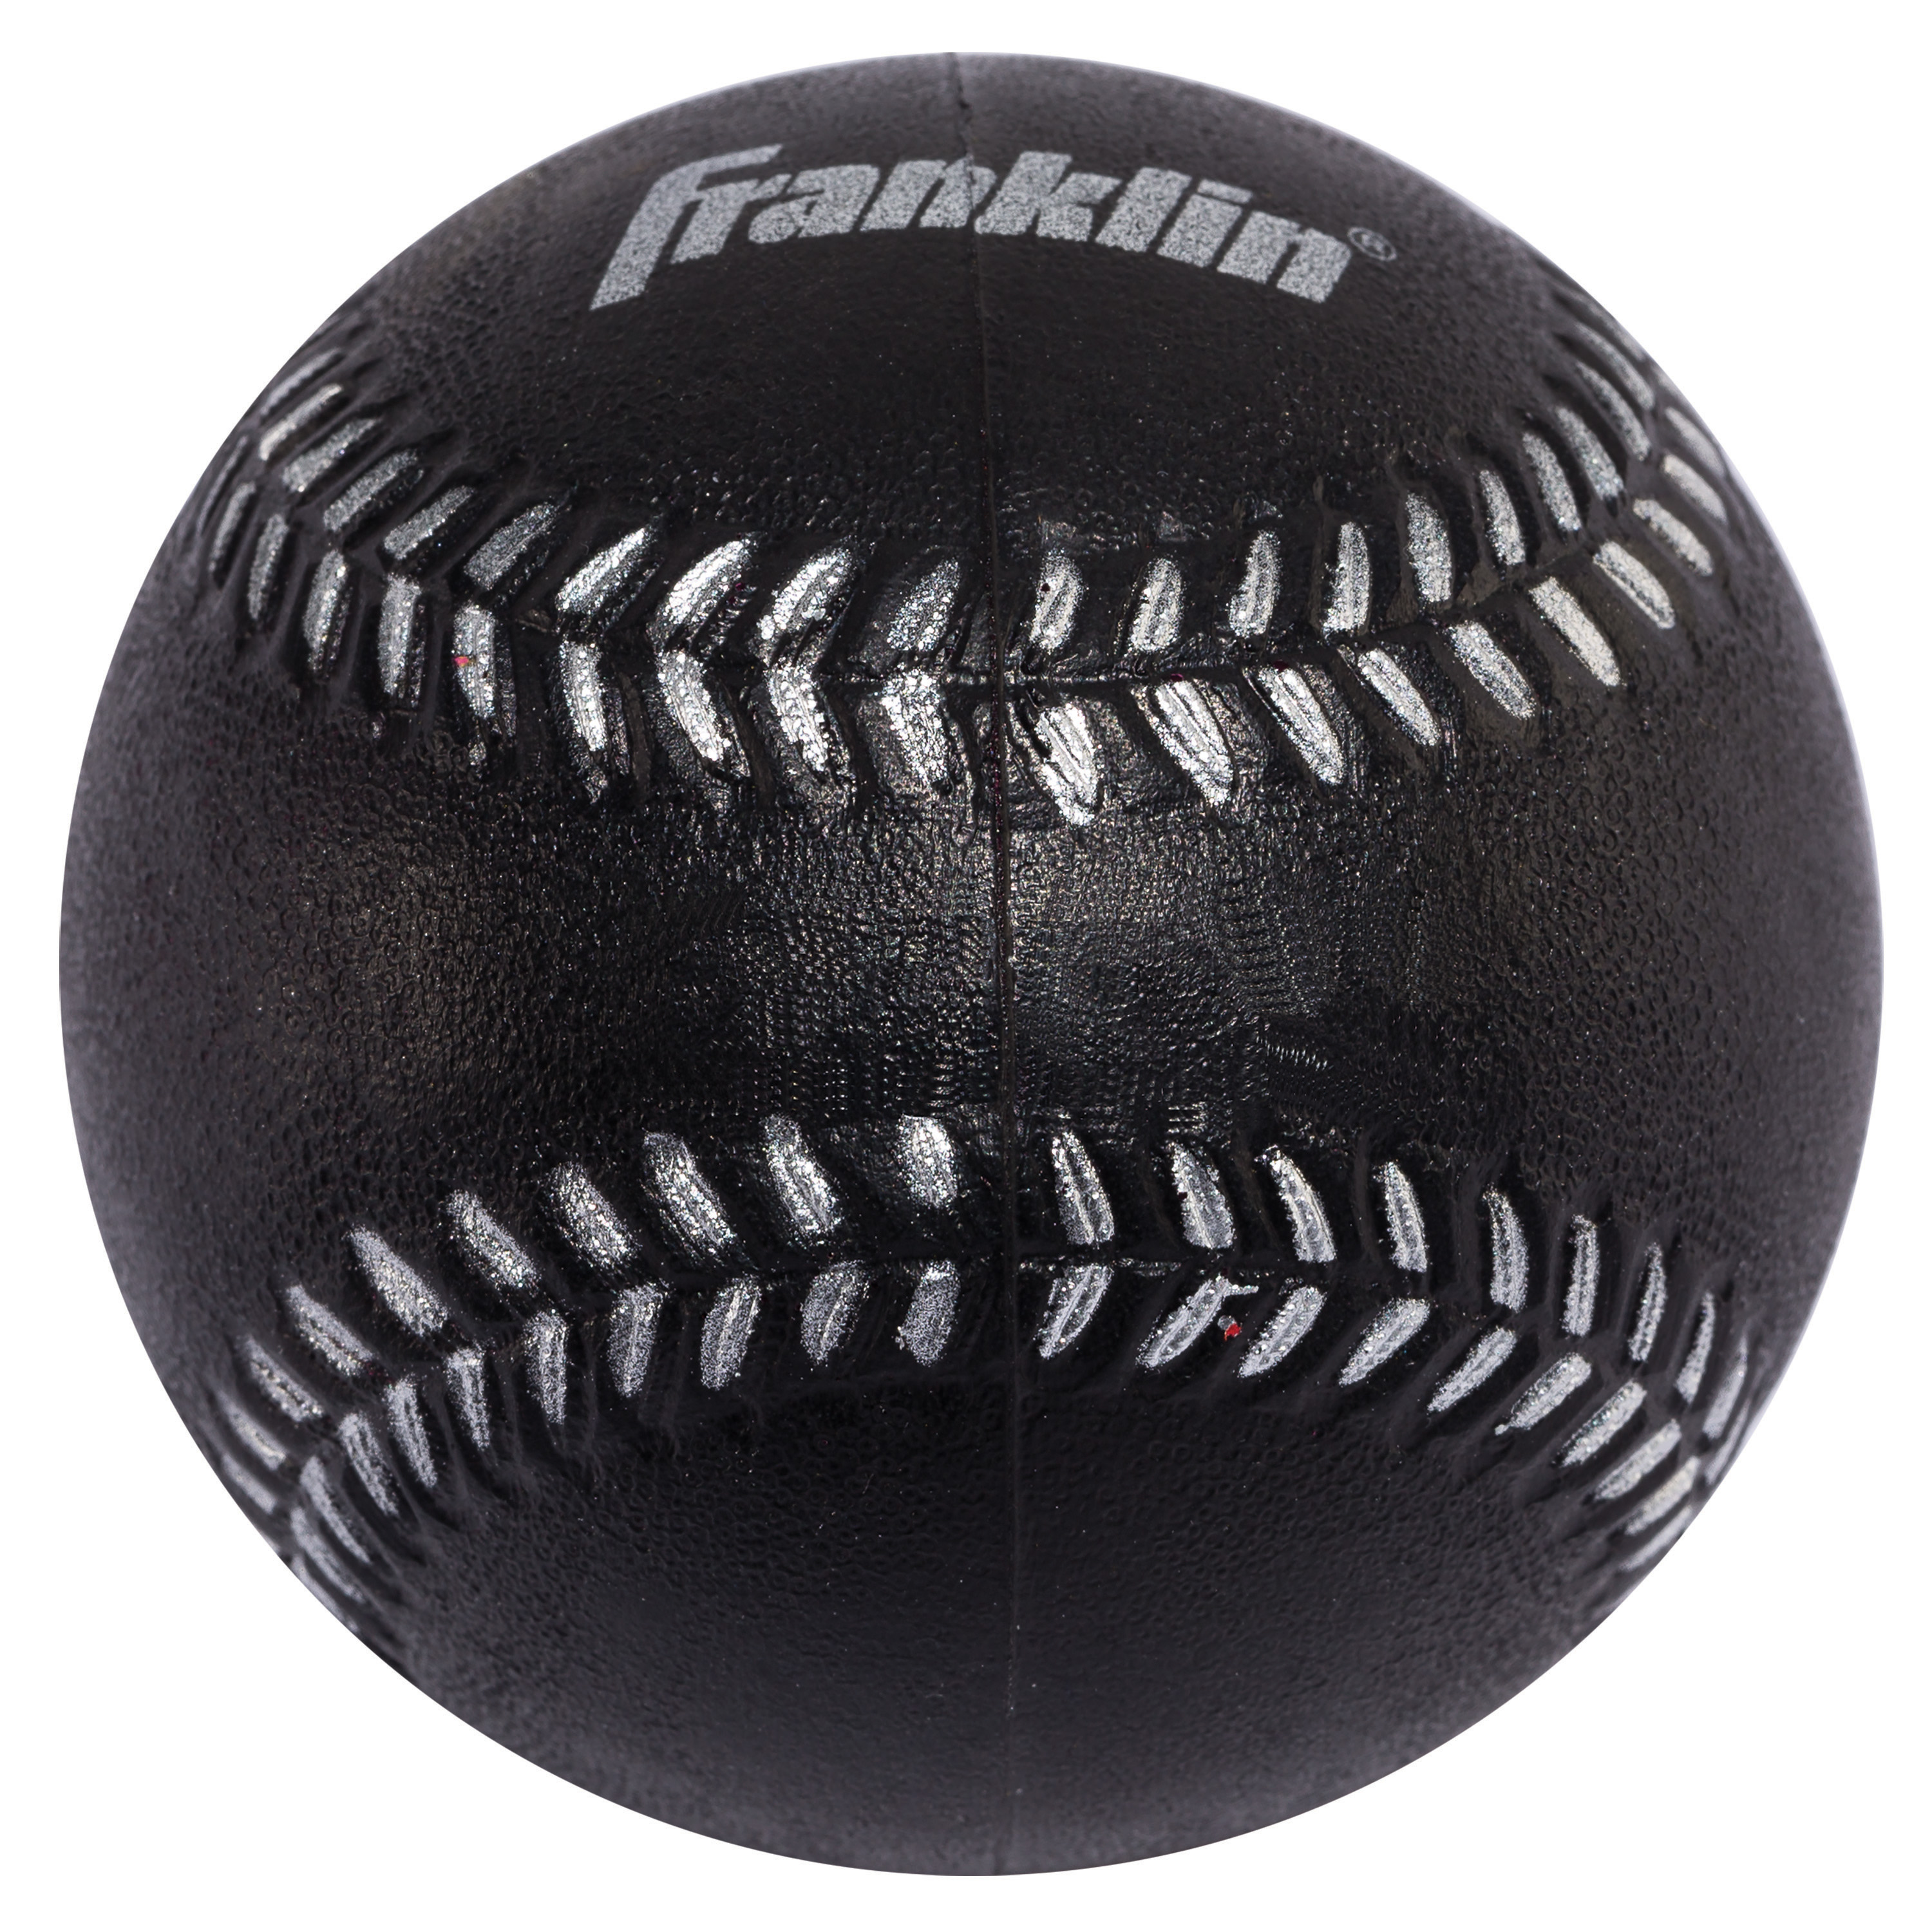 Franklin Sports 9.5 In. RTP Series Baseball Glove, Right Hand Throw, with Ball - image 3 of 4